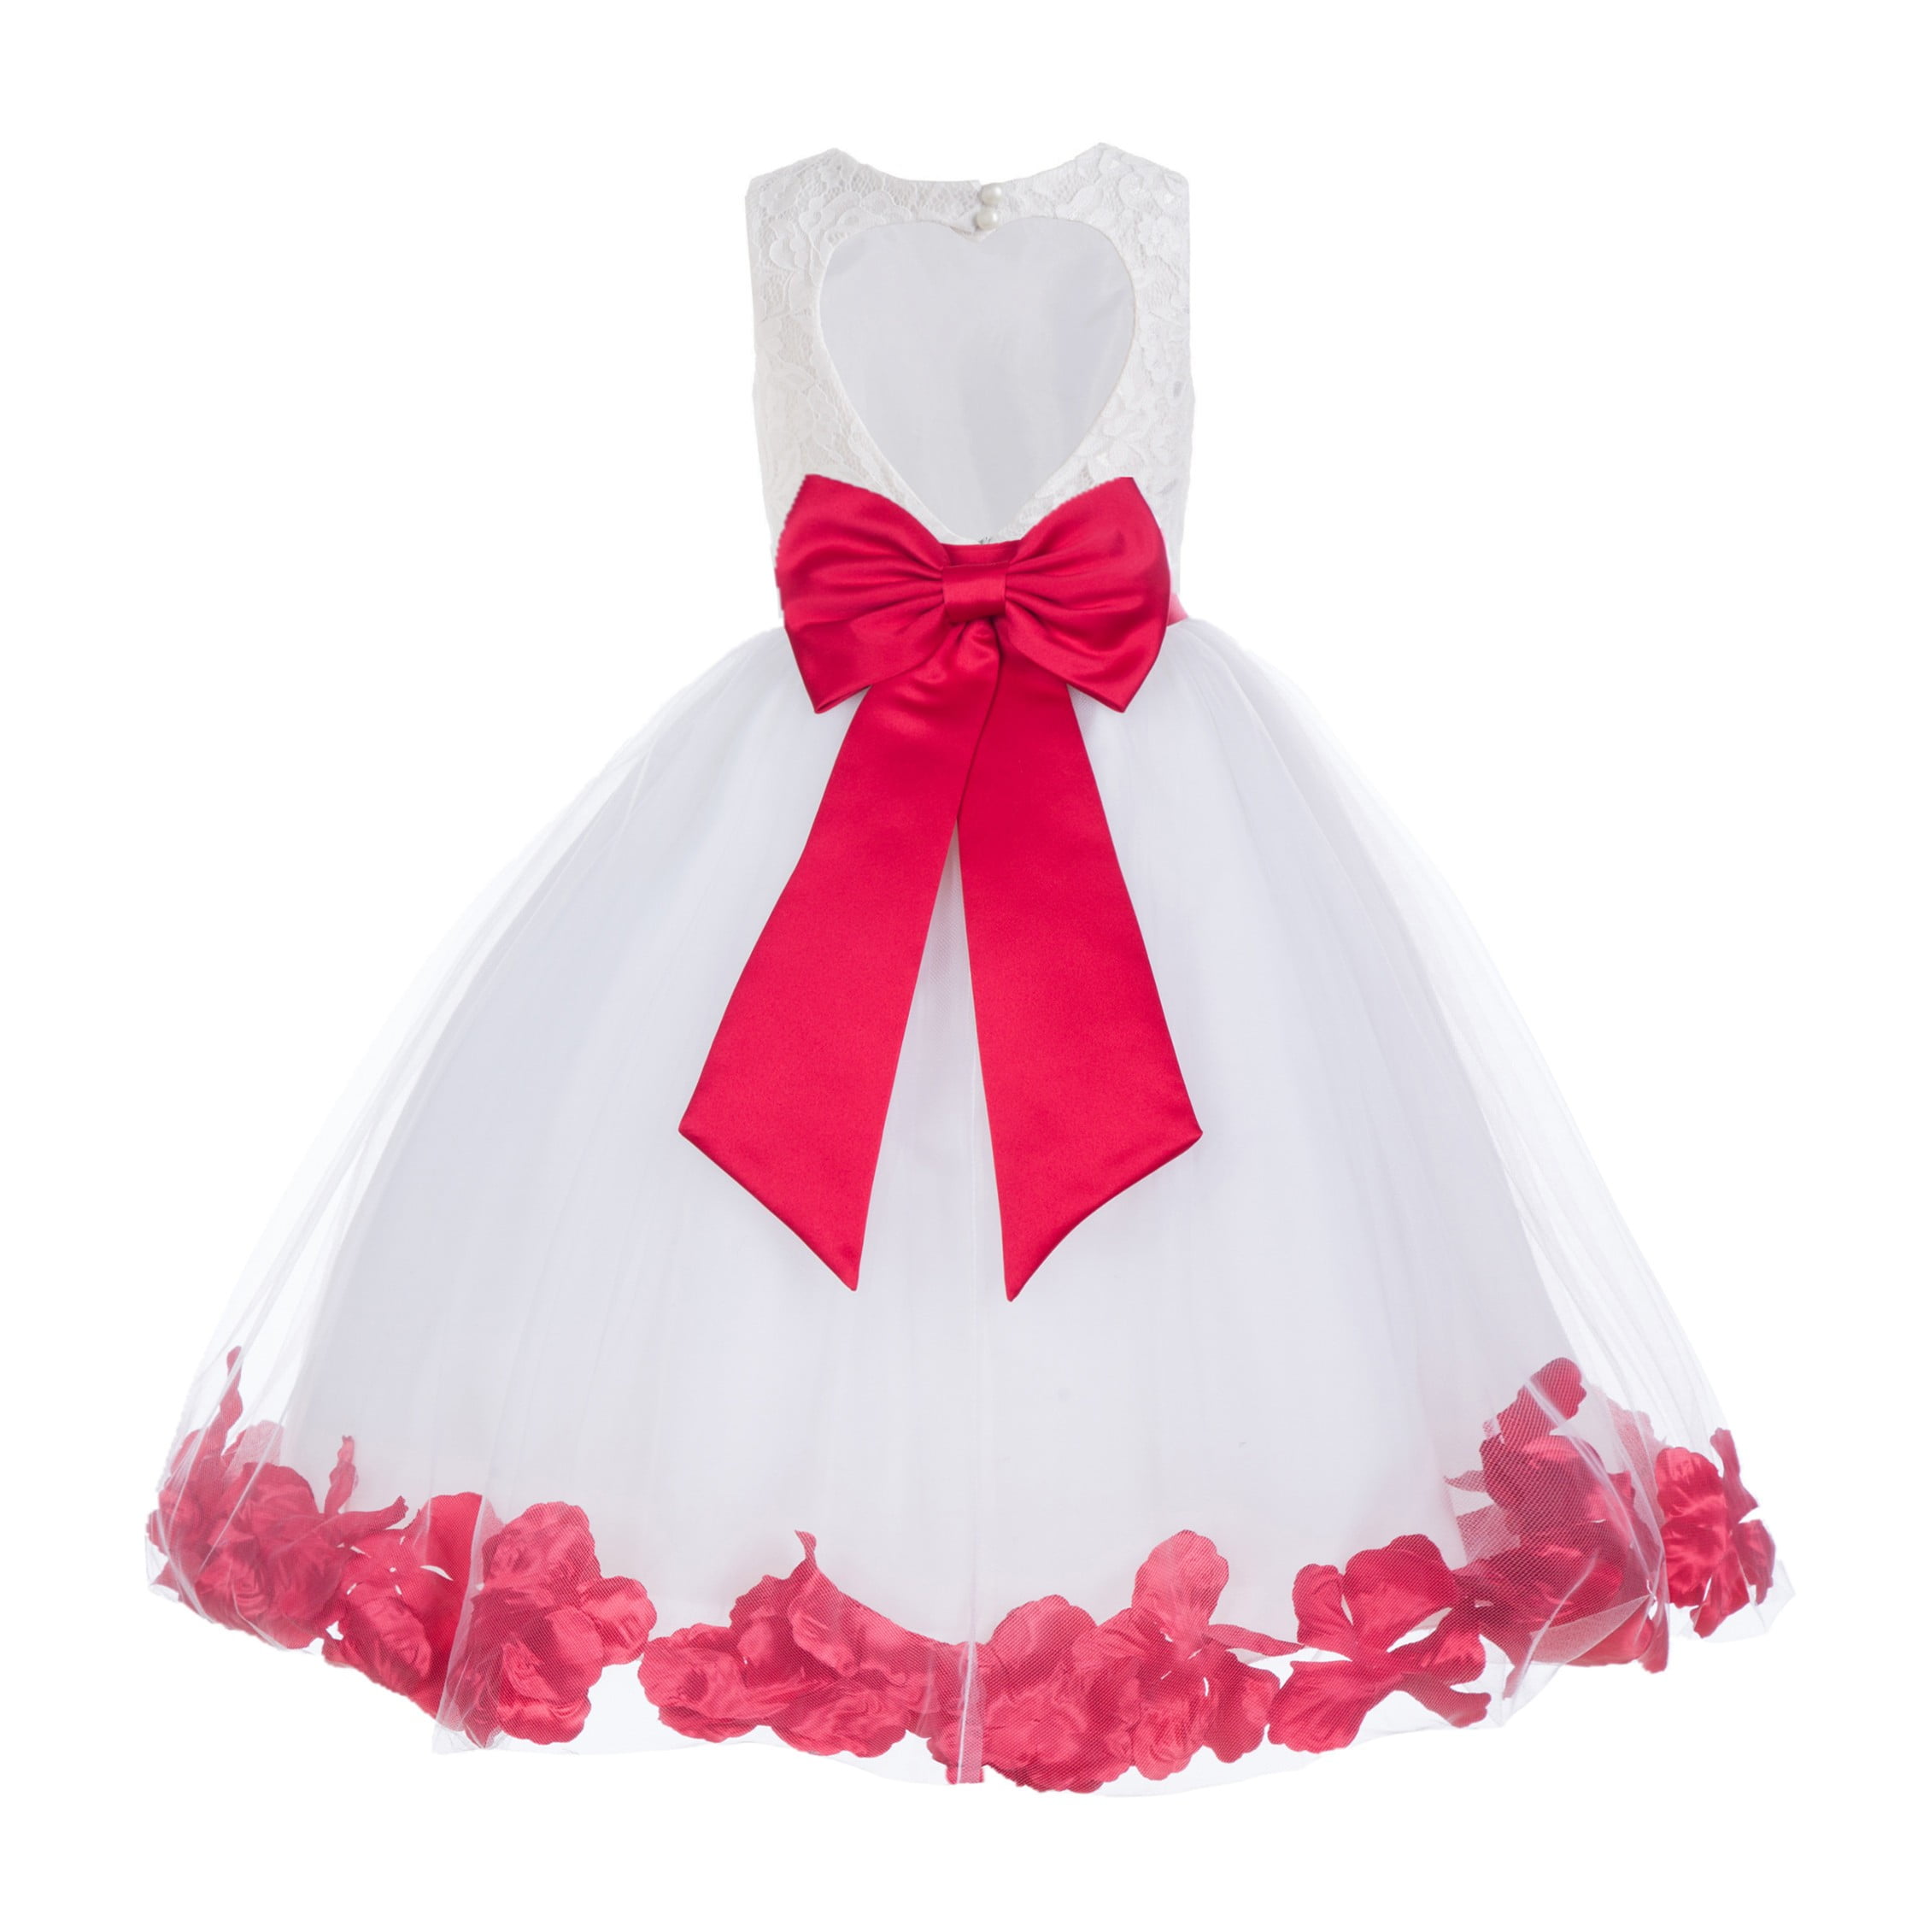 White Floral Rose Petal Flower girl dress Multi-colors Sizes 6-9 months-16 years 